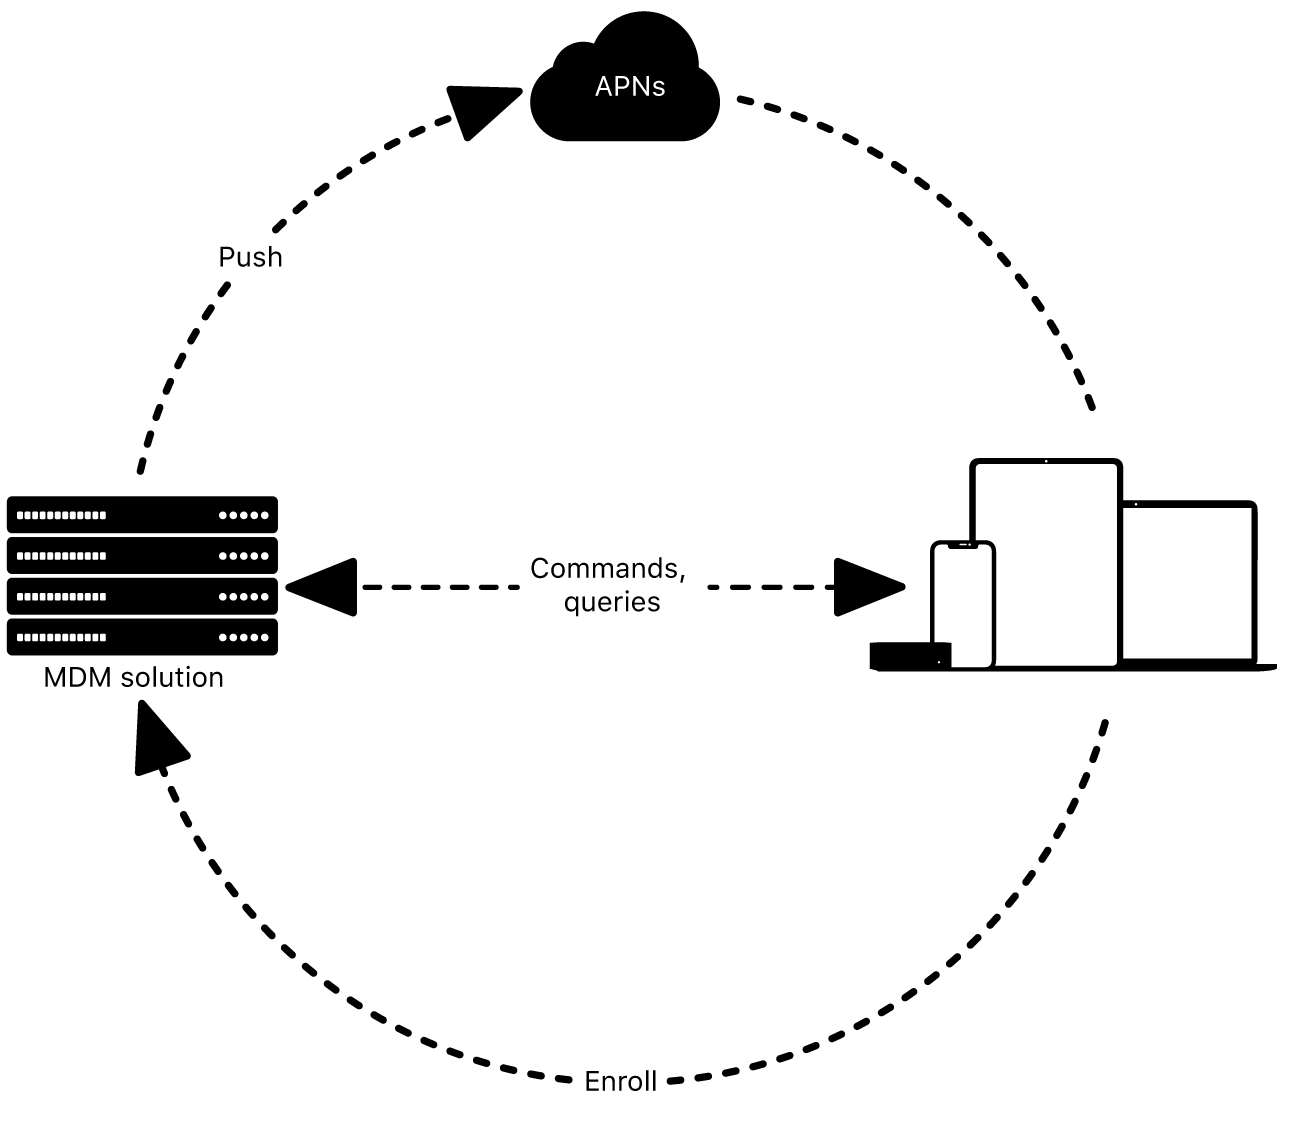 A diagram showing how APNs is used with an MDM solution.